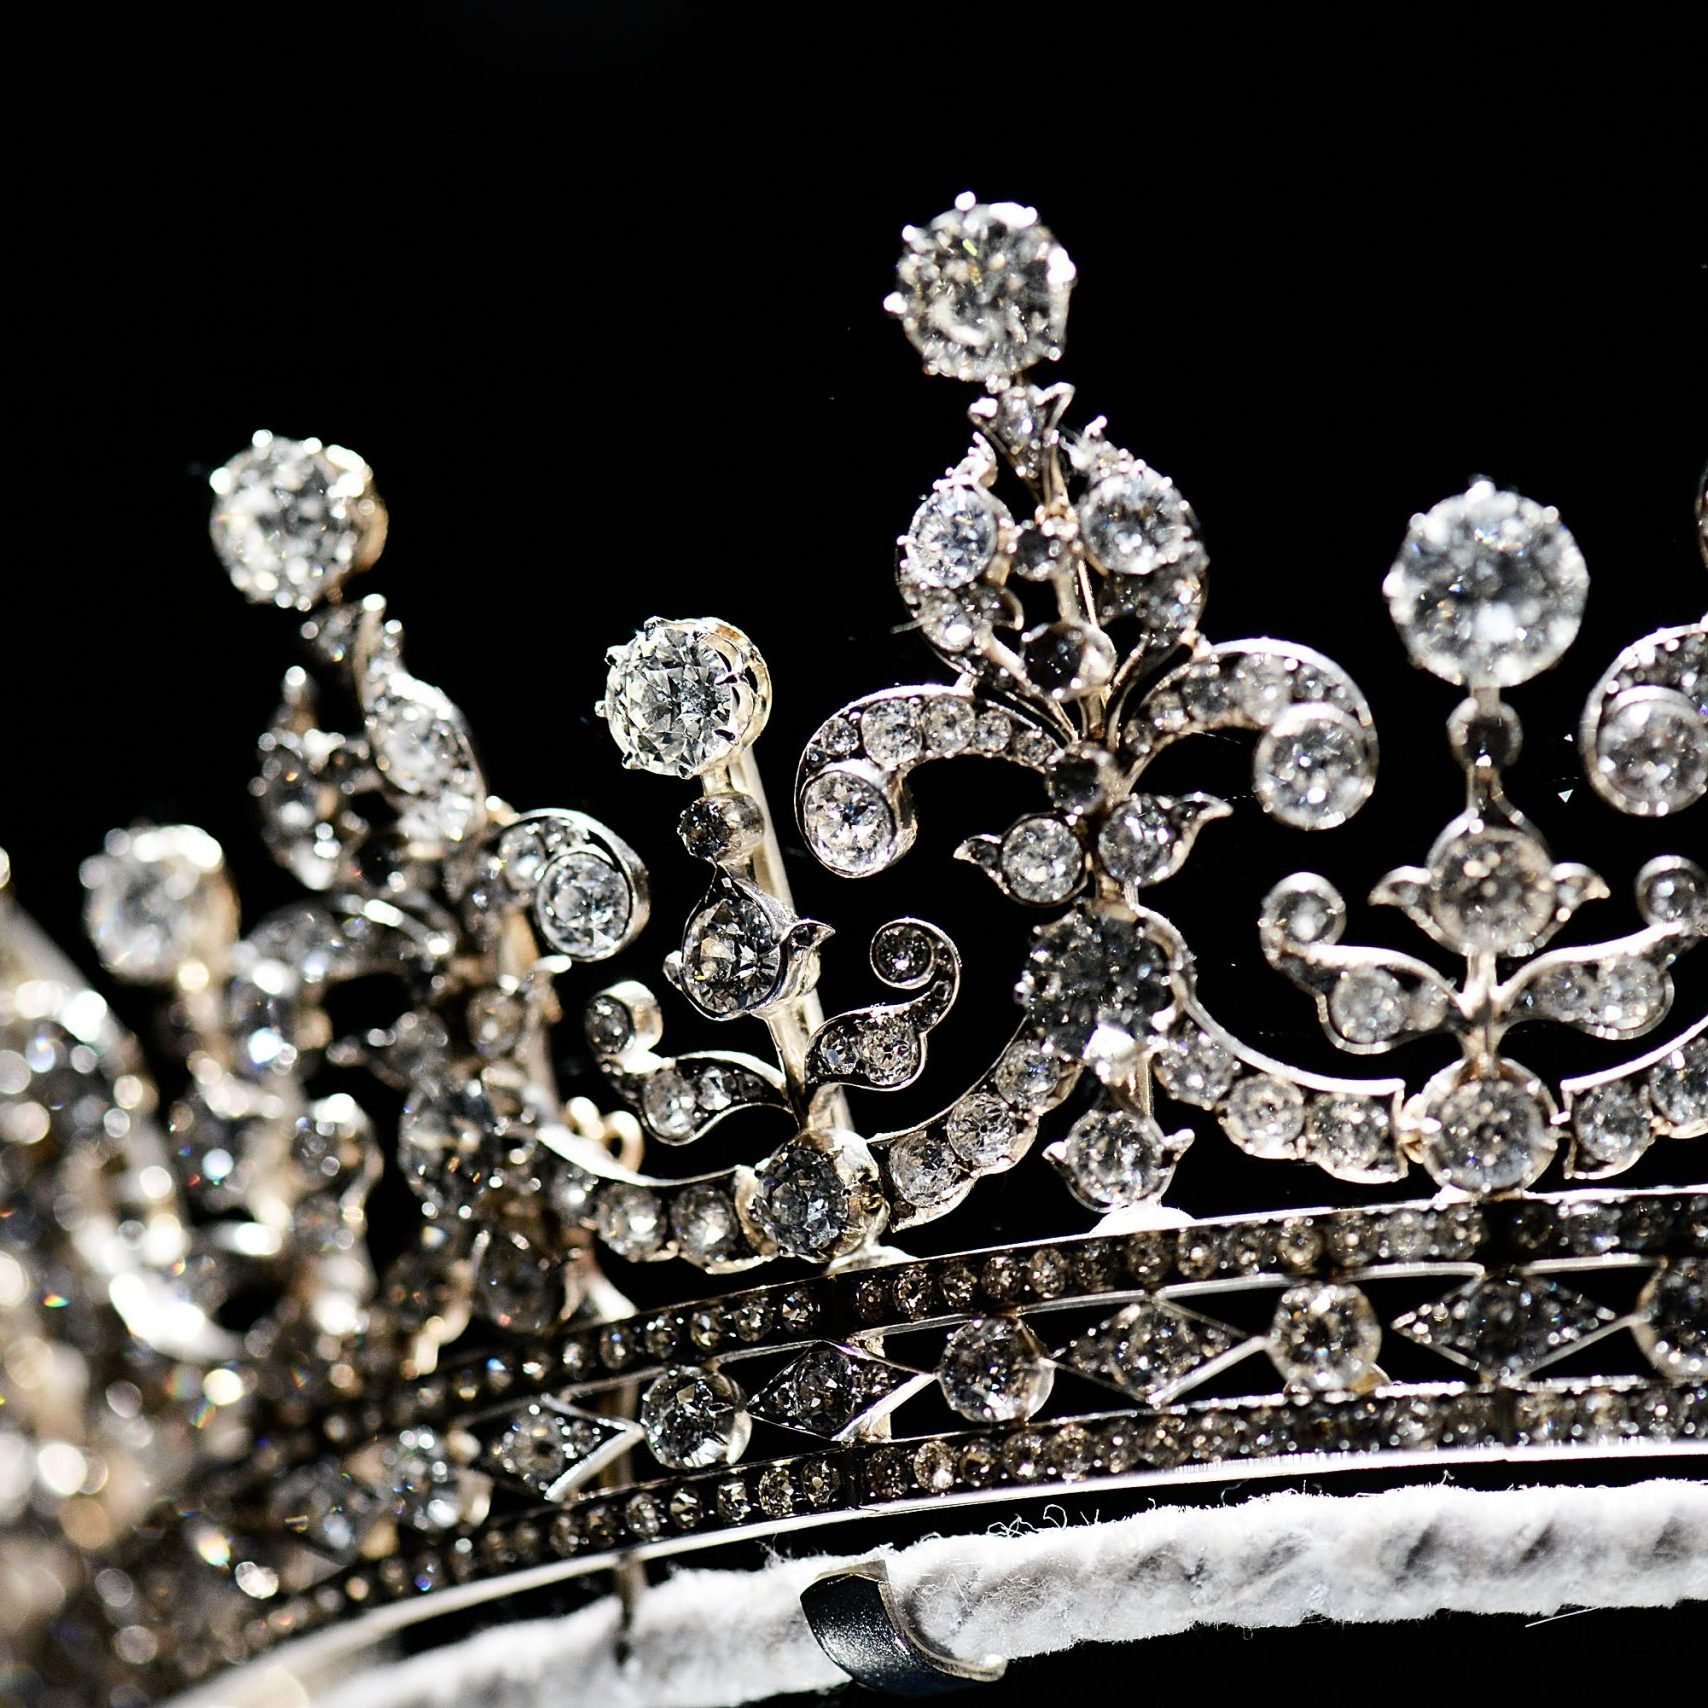 Sale of Crown Jewels: What It is, How It Works